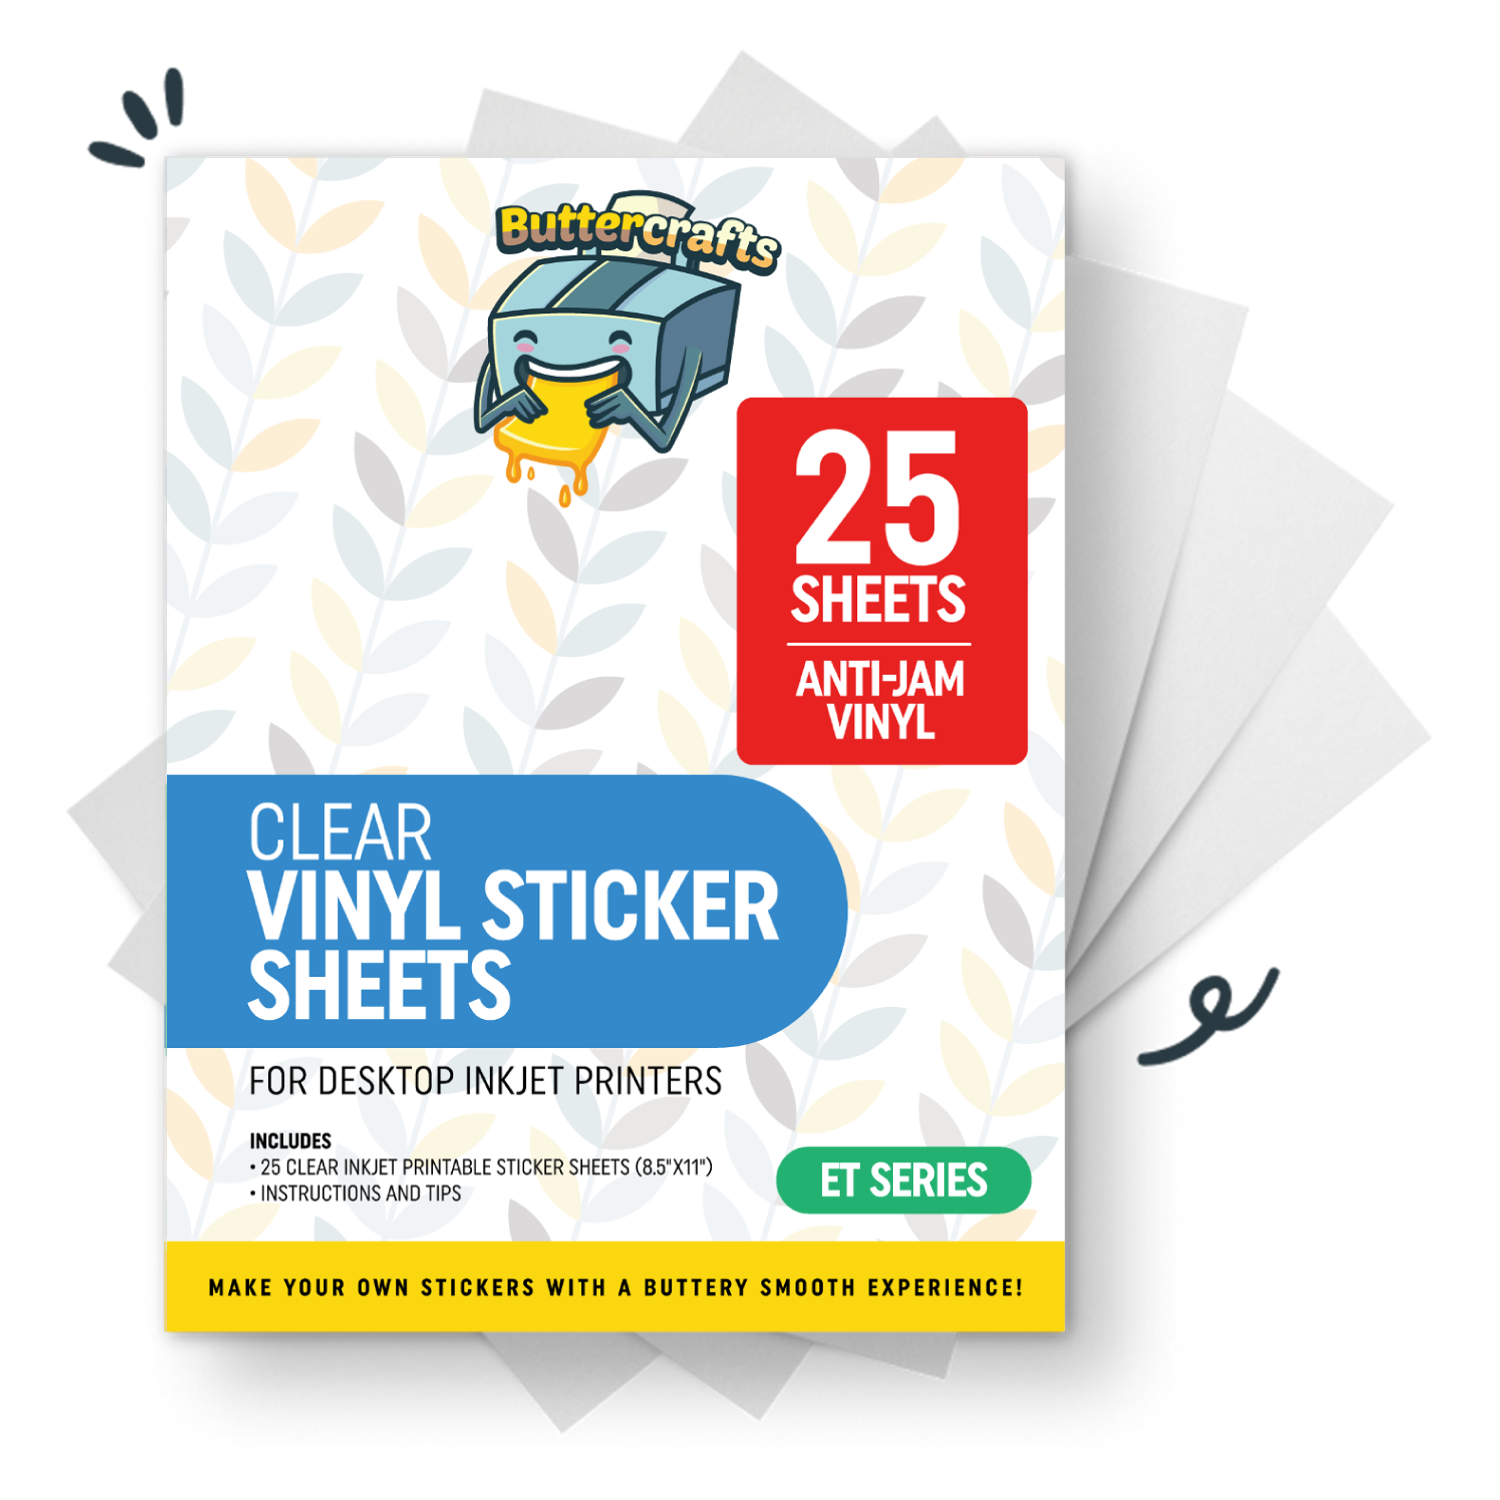 Difference Between Paper Stickers and Vinyl Stickers